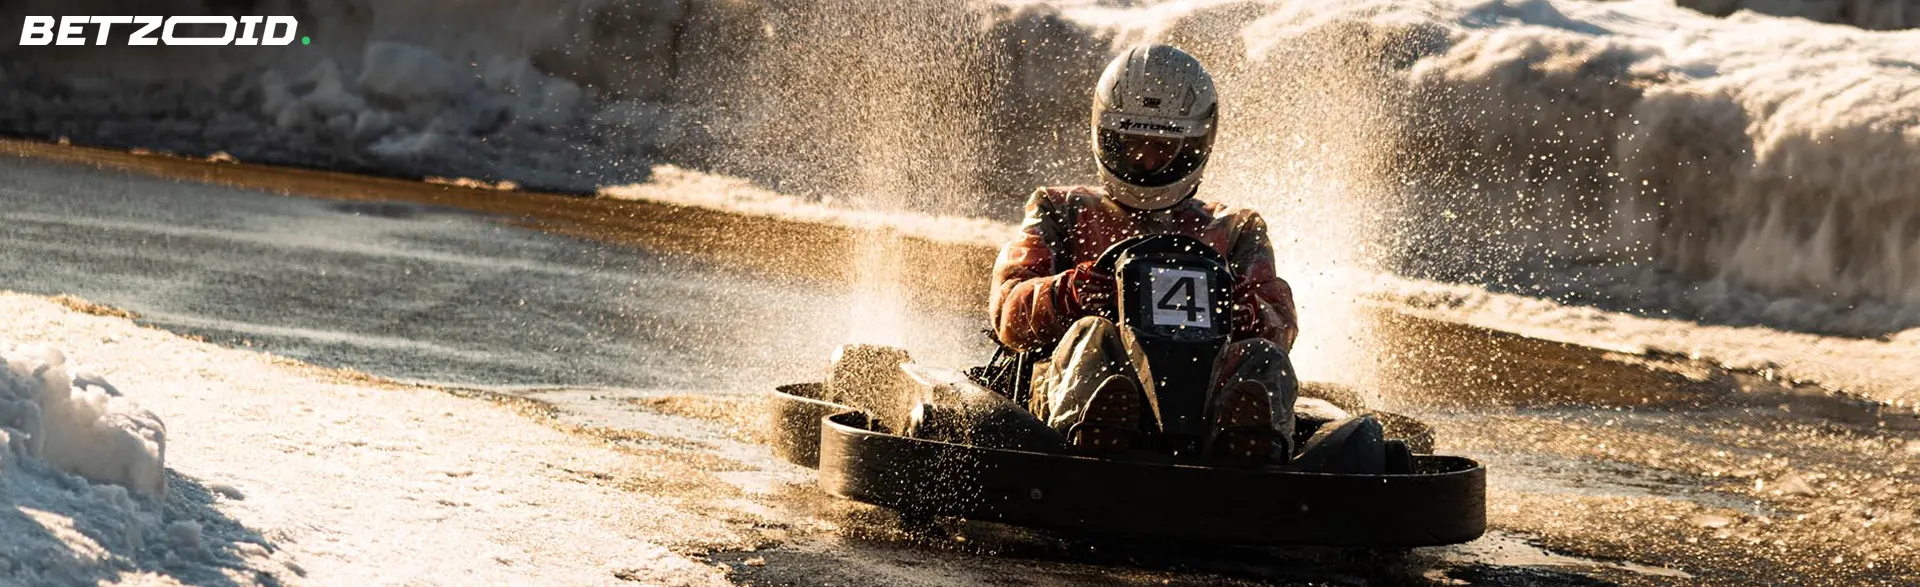 Go-kart racing on a wet track, symbolizing the excitement and dynamic nature of BC betting sites.